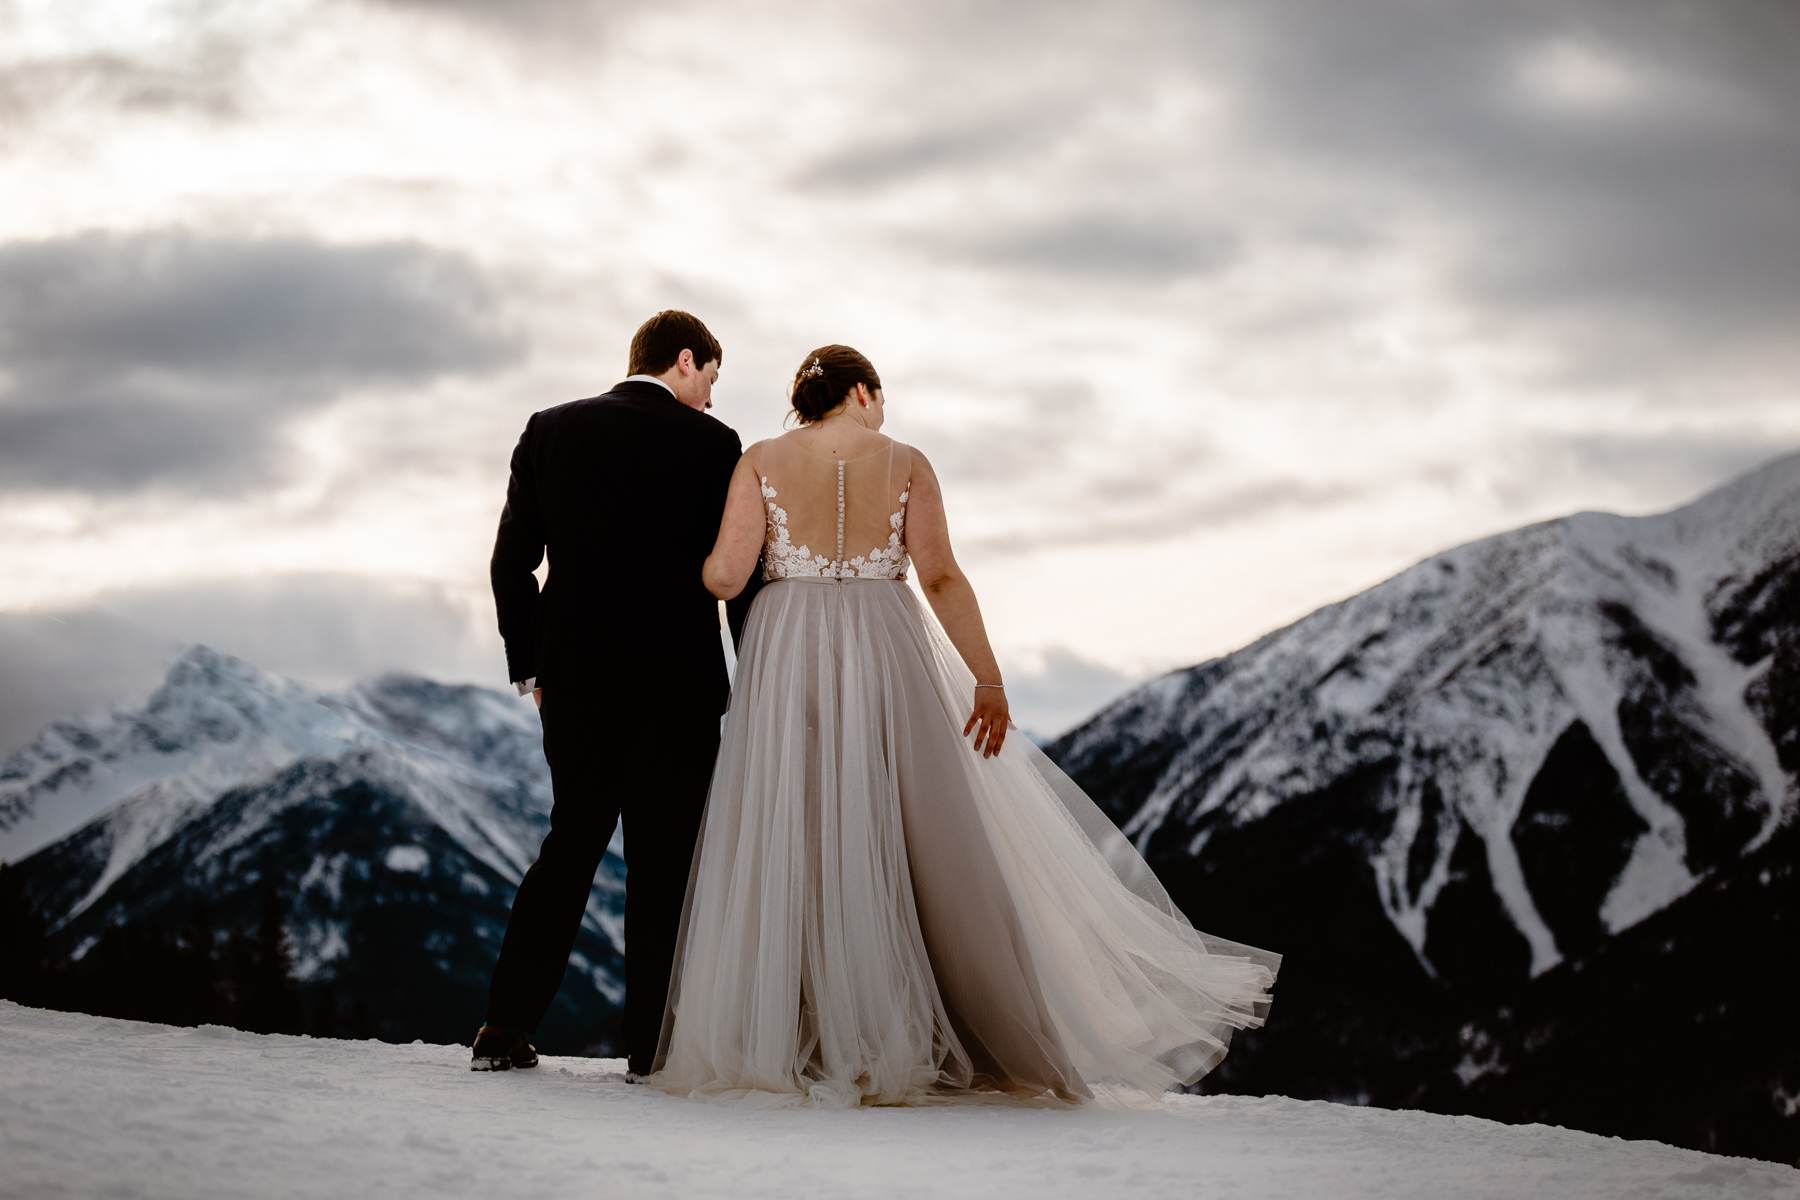 Invermere Wedding Photographers at the Eagle Ranch Golf Club venue and Panorama Ski Resort for Winter Wedding Photos